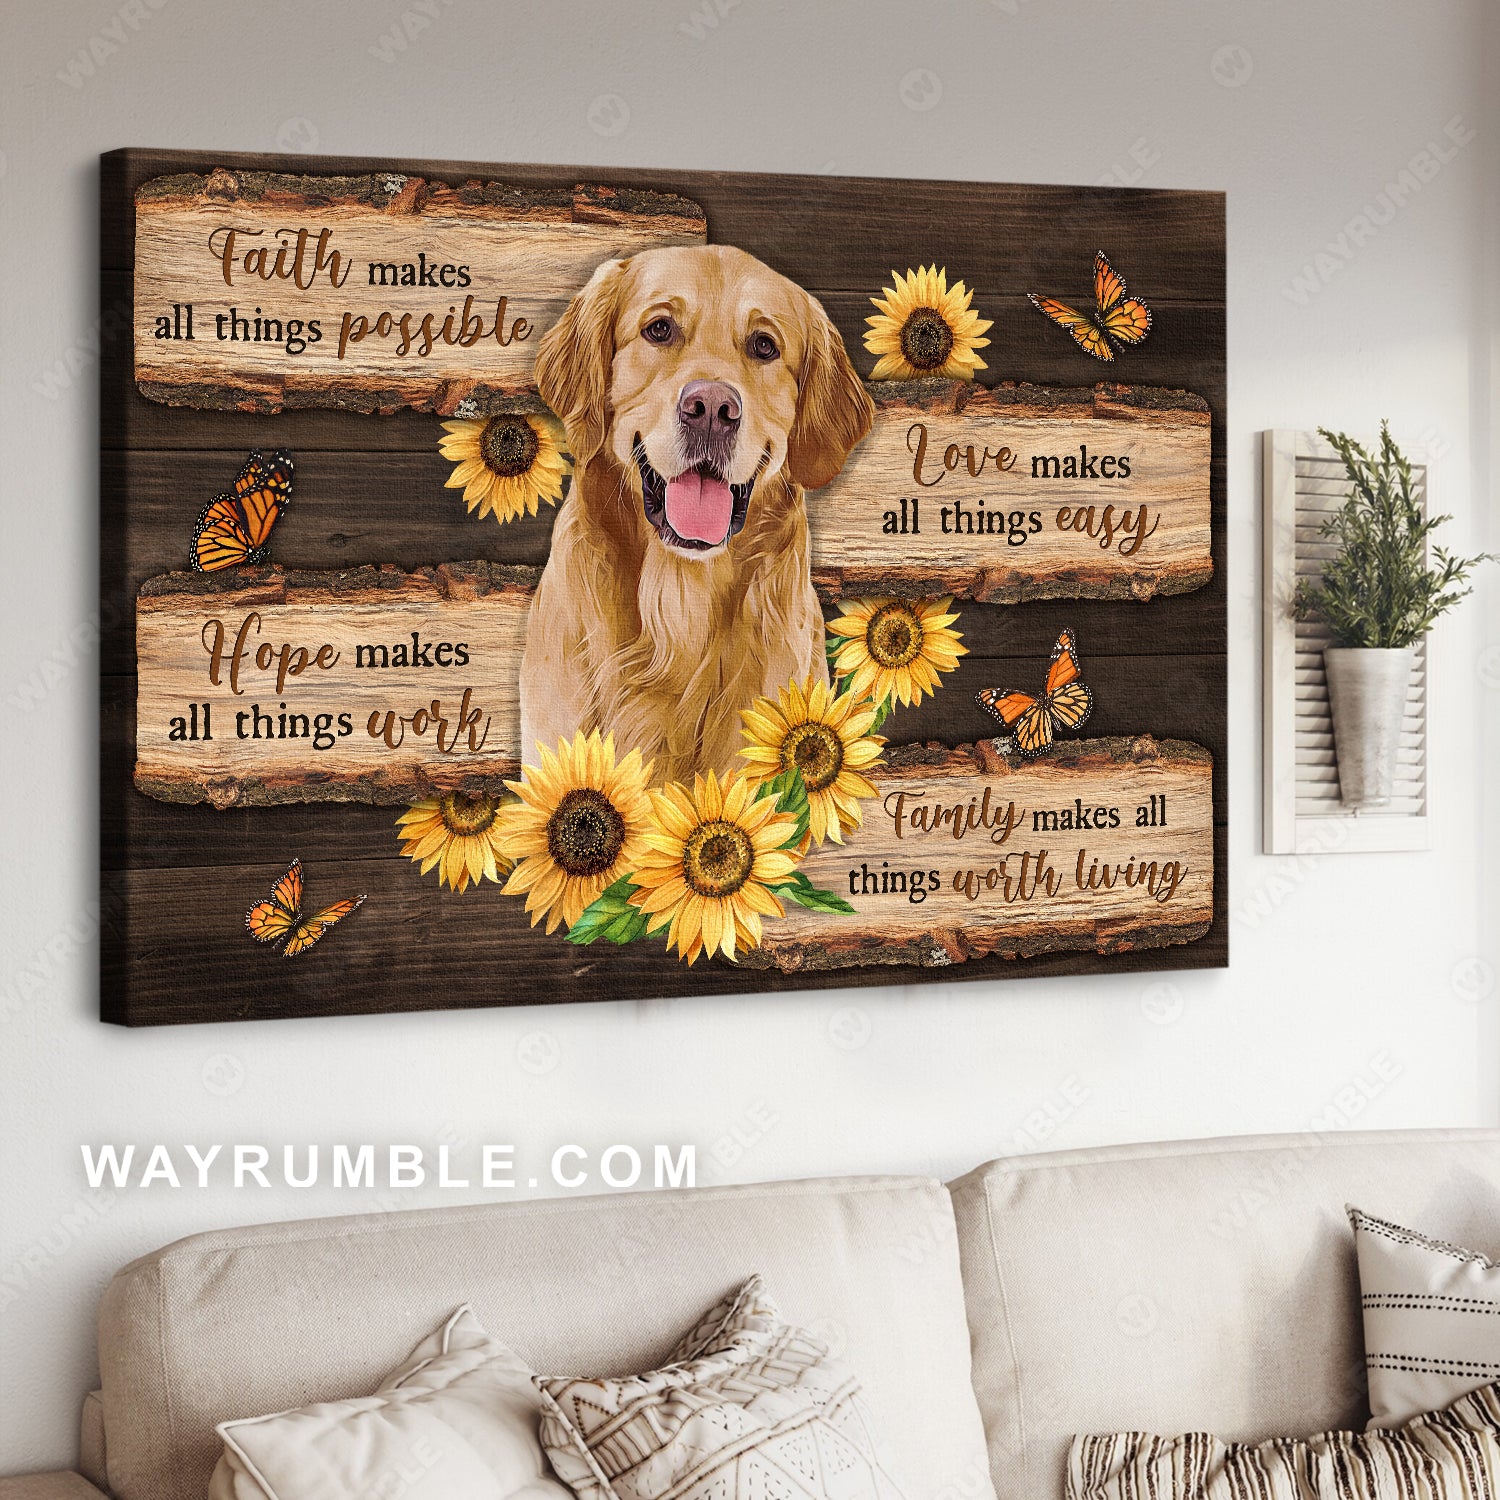 Cute Golden Retriever, Sunflower painting, Faith makes all thing possible - Jesus Landscape Canvas Prints, Home Decor Wall Art